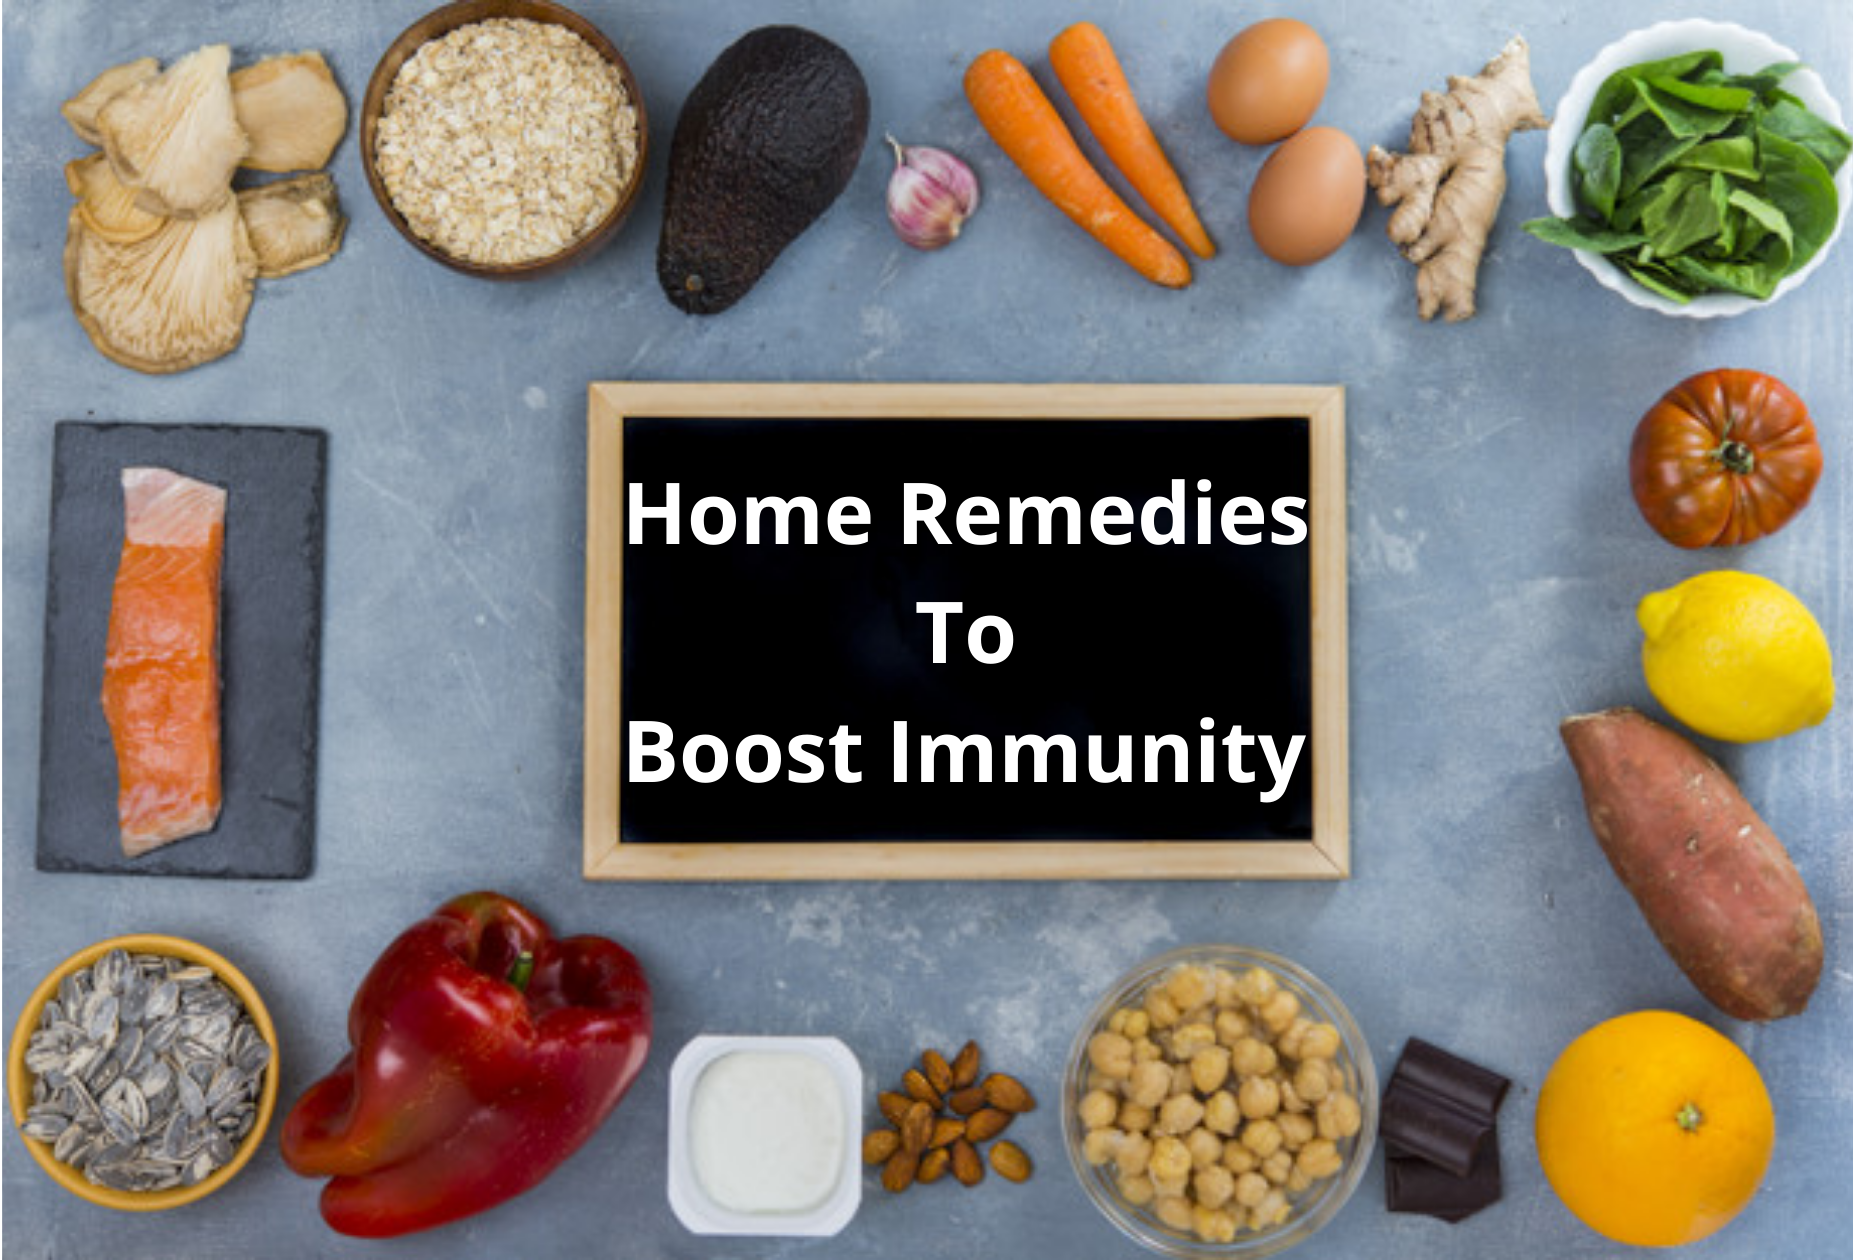 we all know that building a good immunity will definitely help to combat the infection. We are clear on this point. But, how to do this?